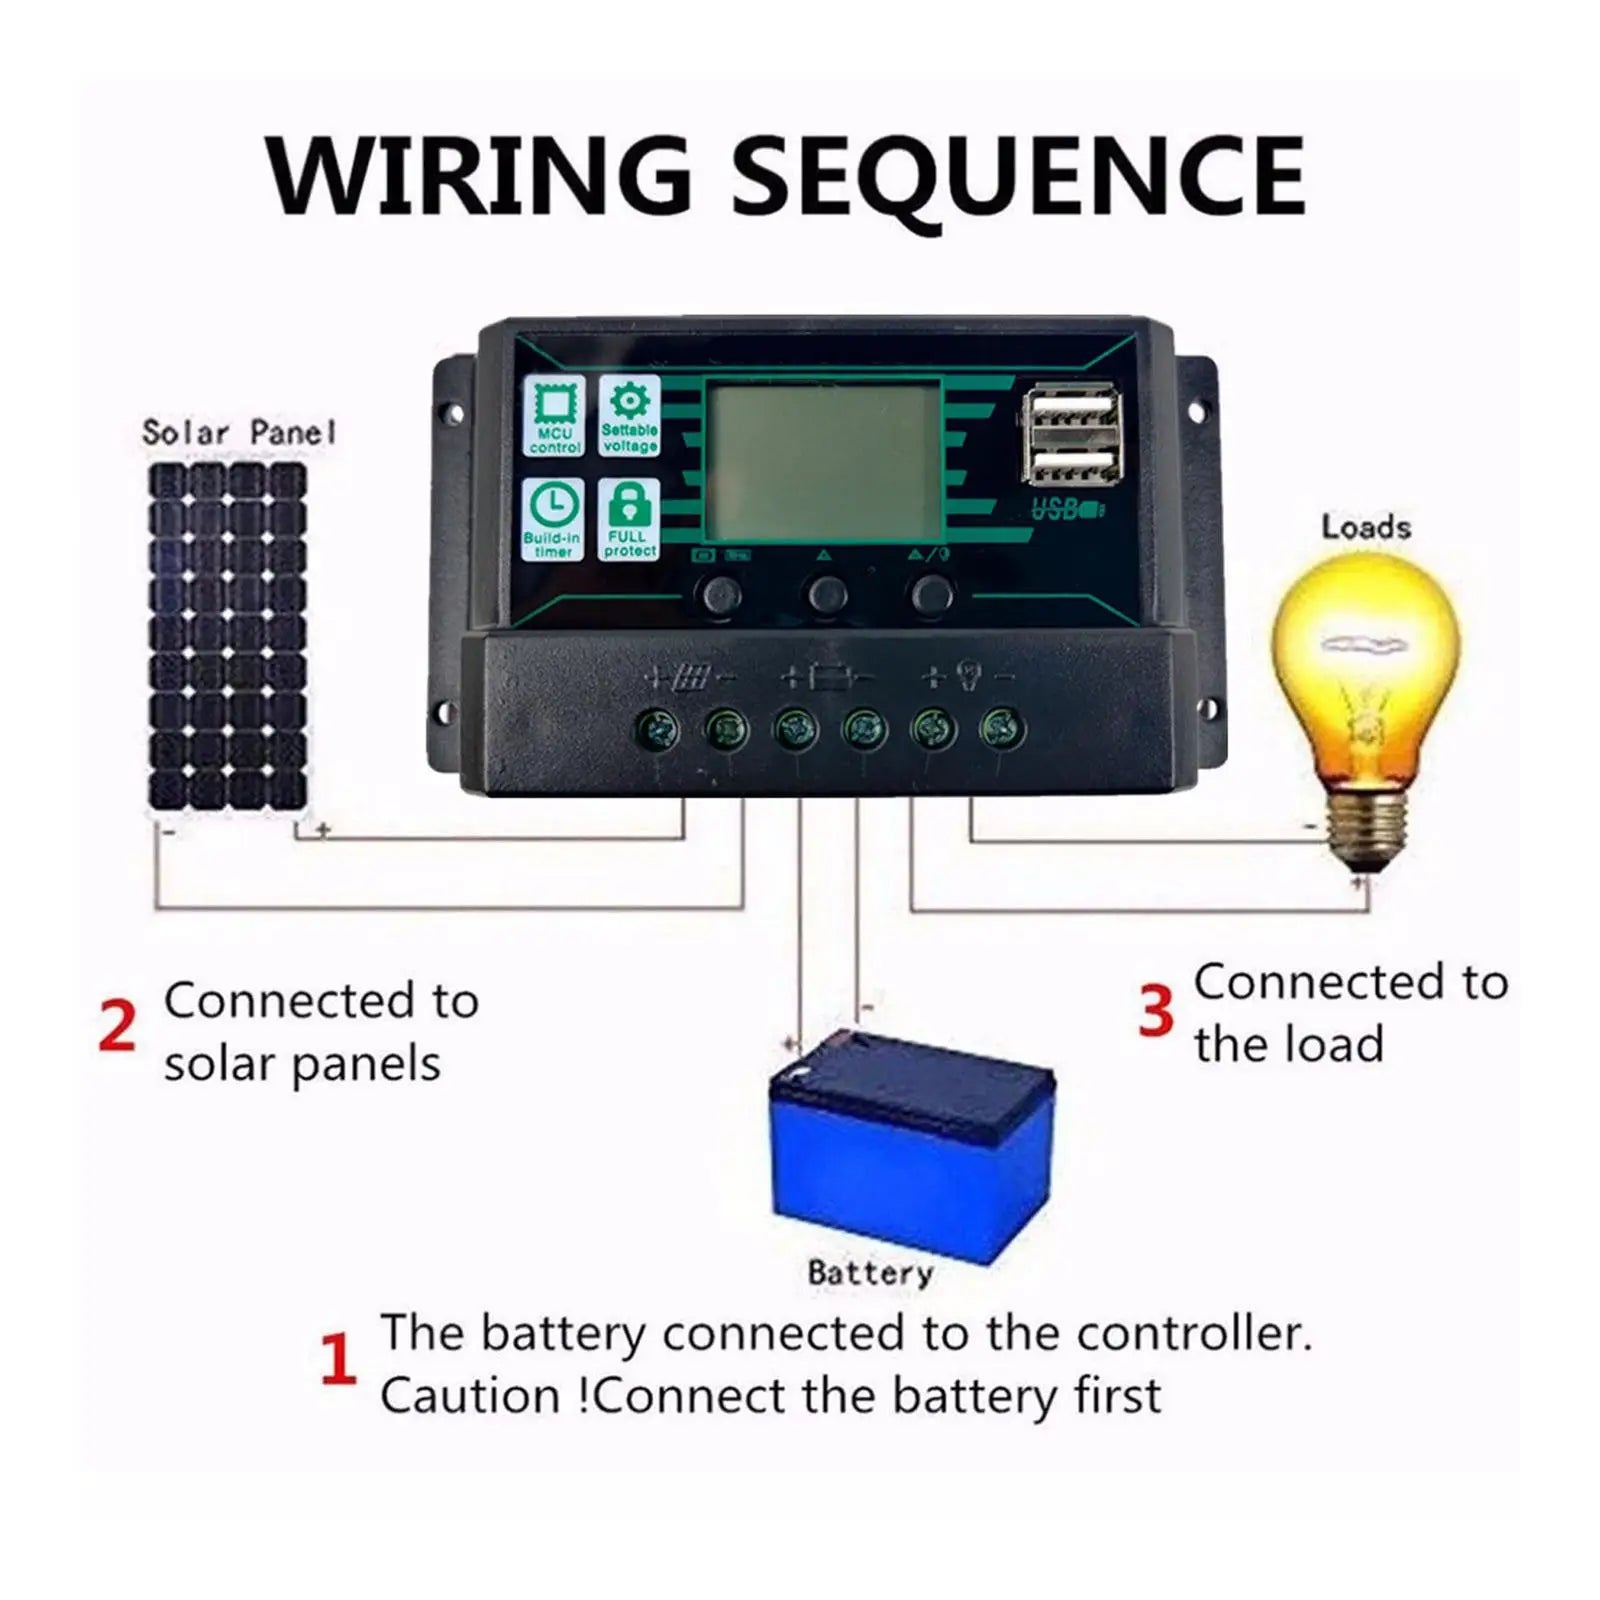 MPPT 10/20/30/60/100A Solar Charge Controller, Connect battery first, then solar panels to MPPT charge controller; USB output for small loads and full load port for larger loads.